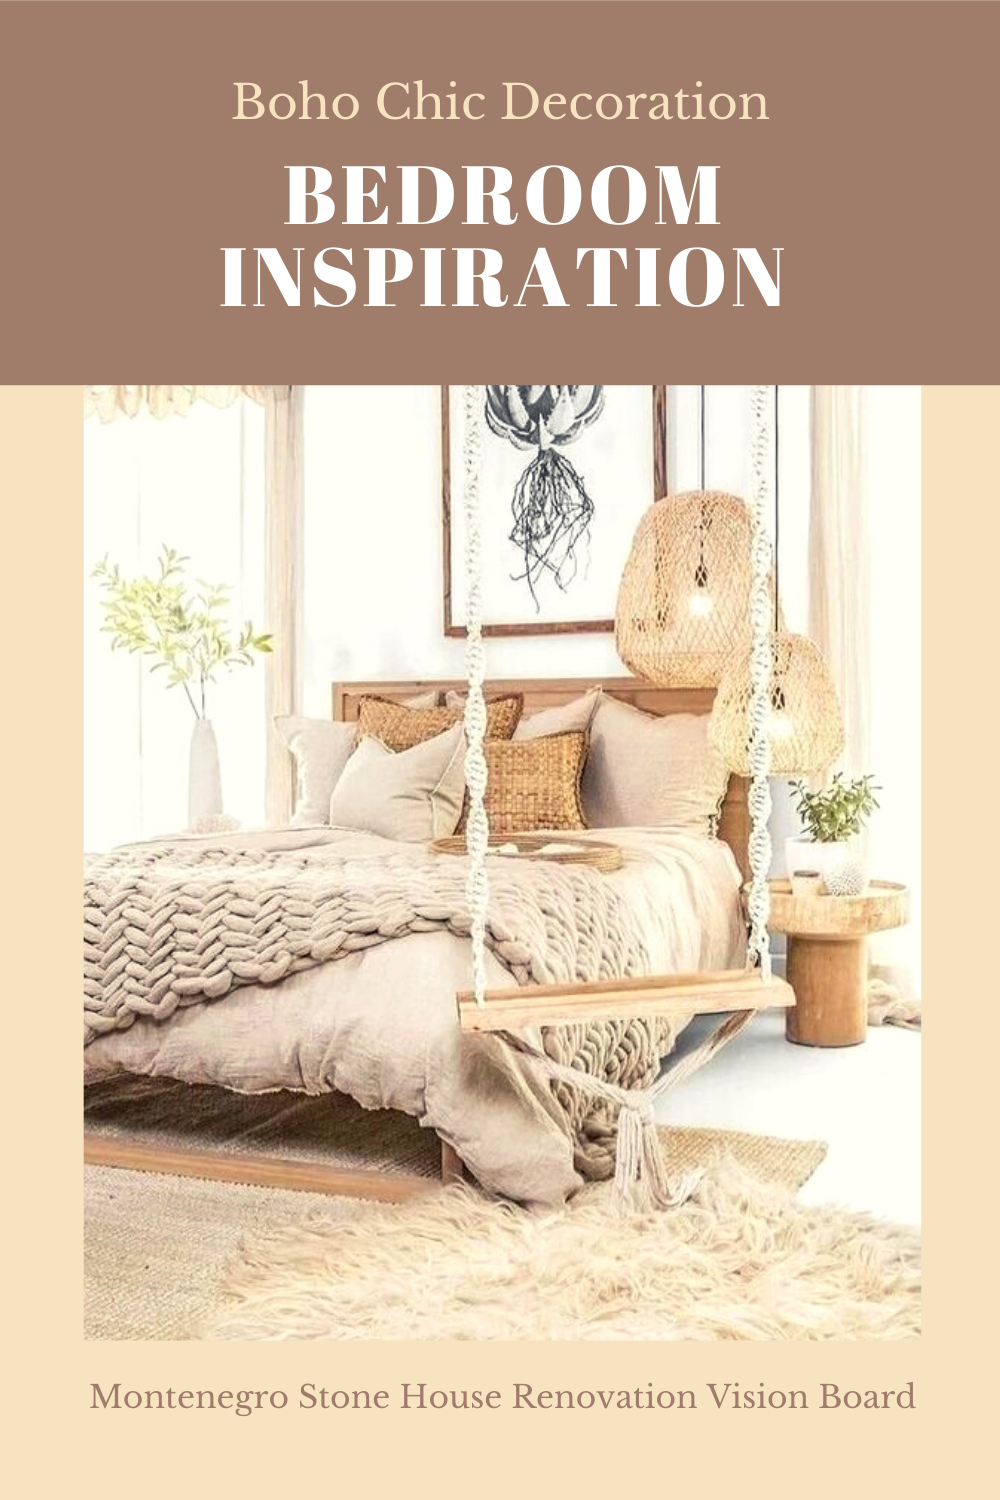 Bedroom Inspiration with Boho Chic Decoration.png